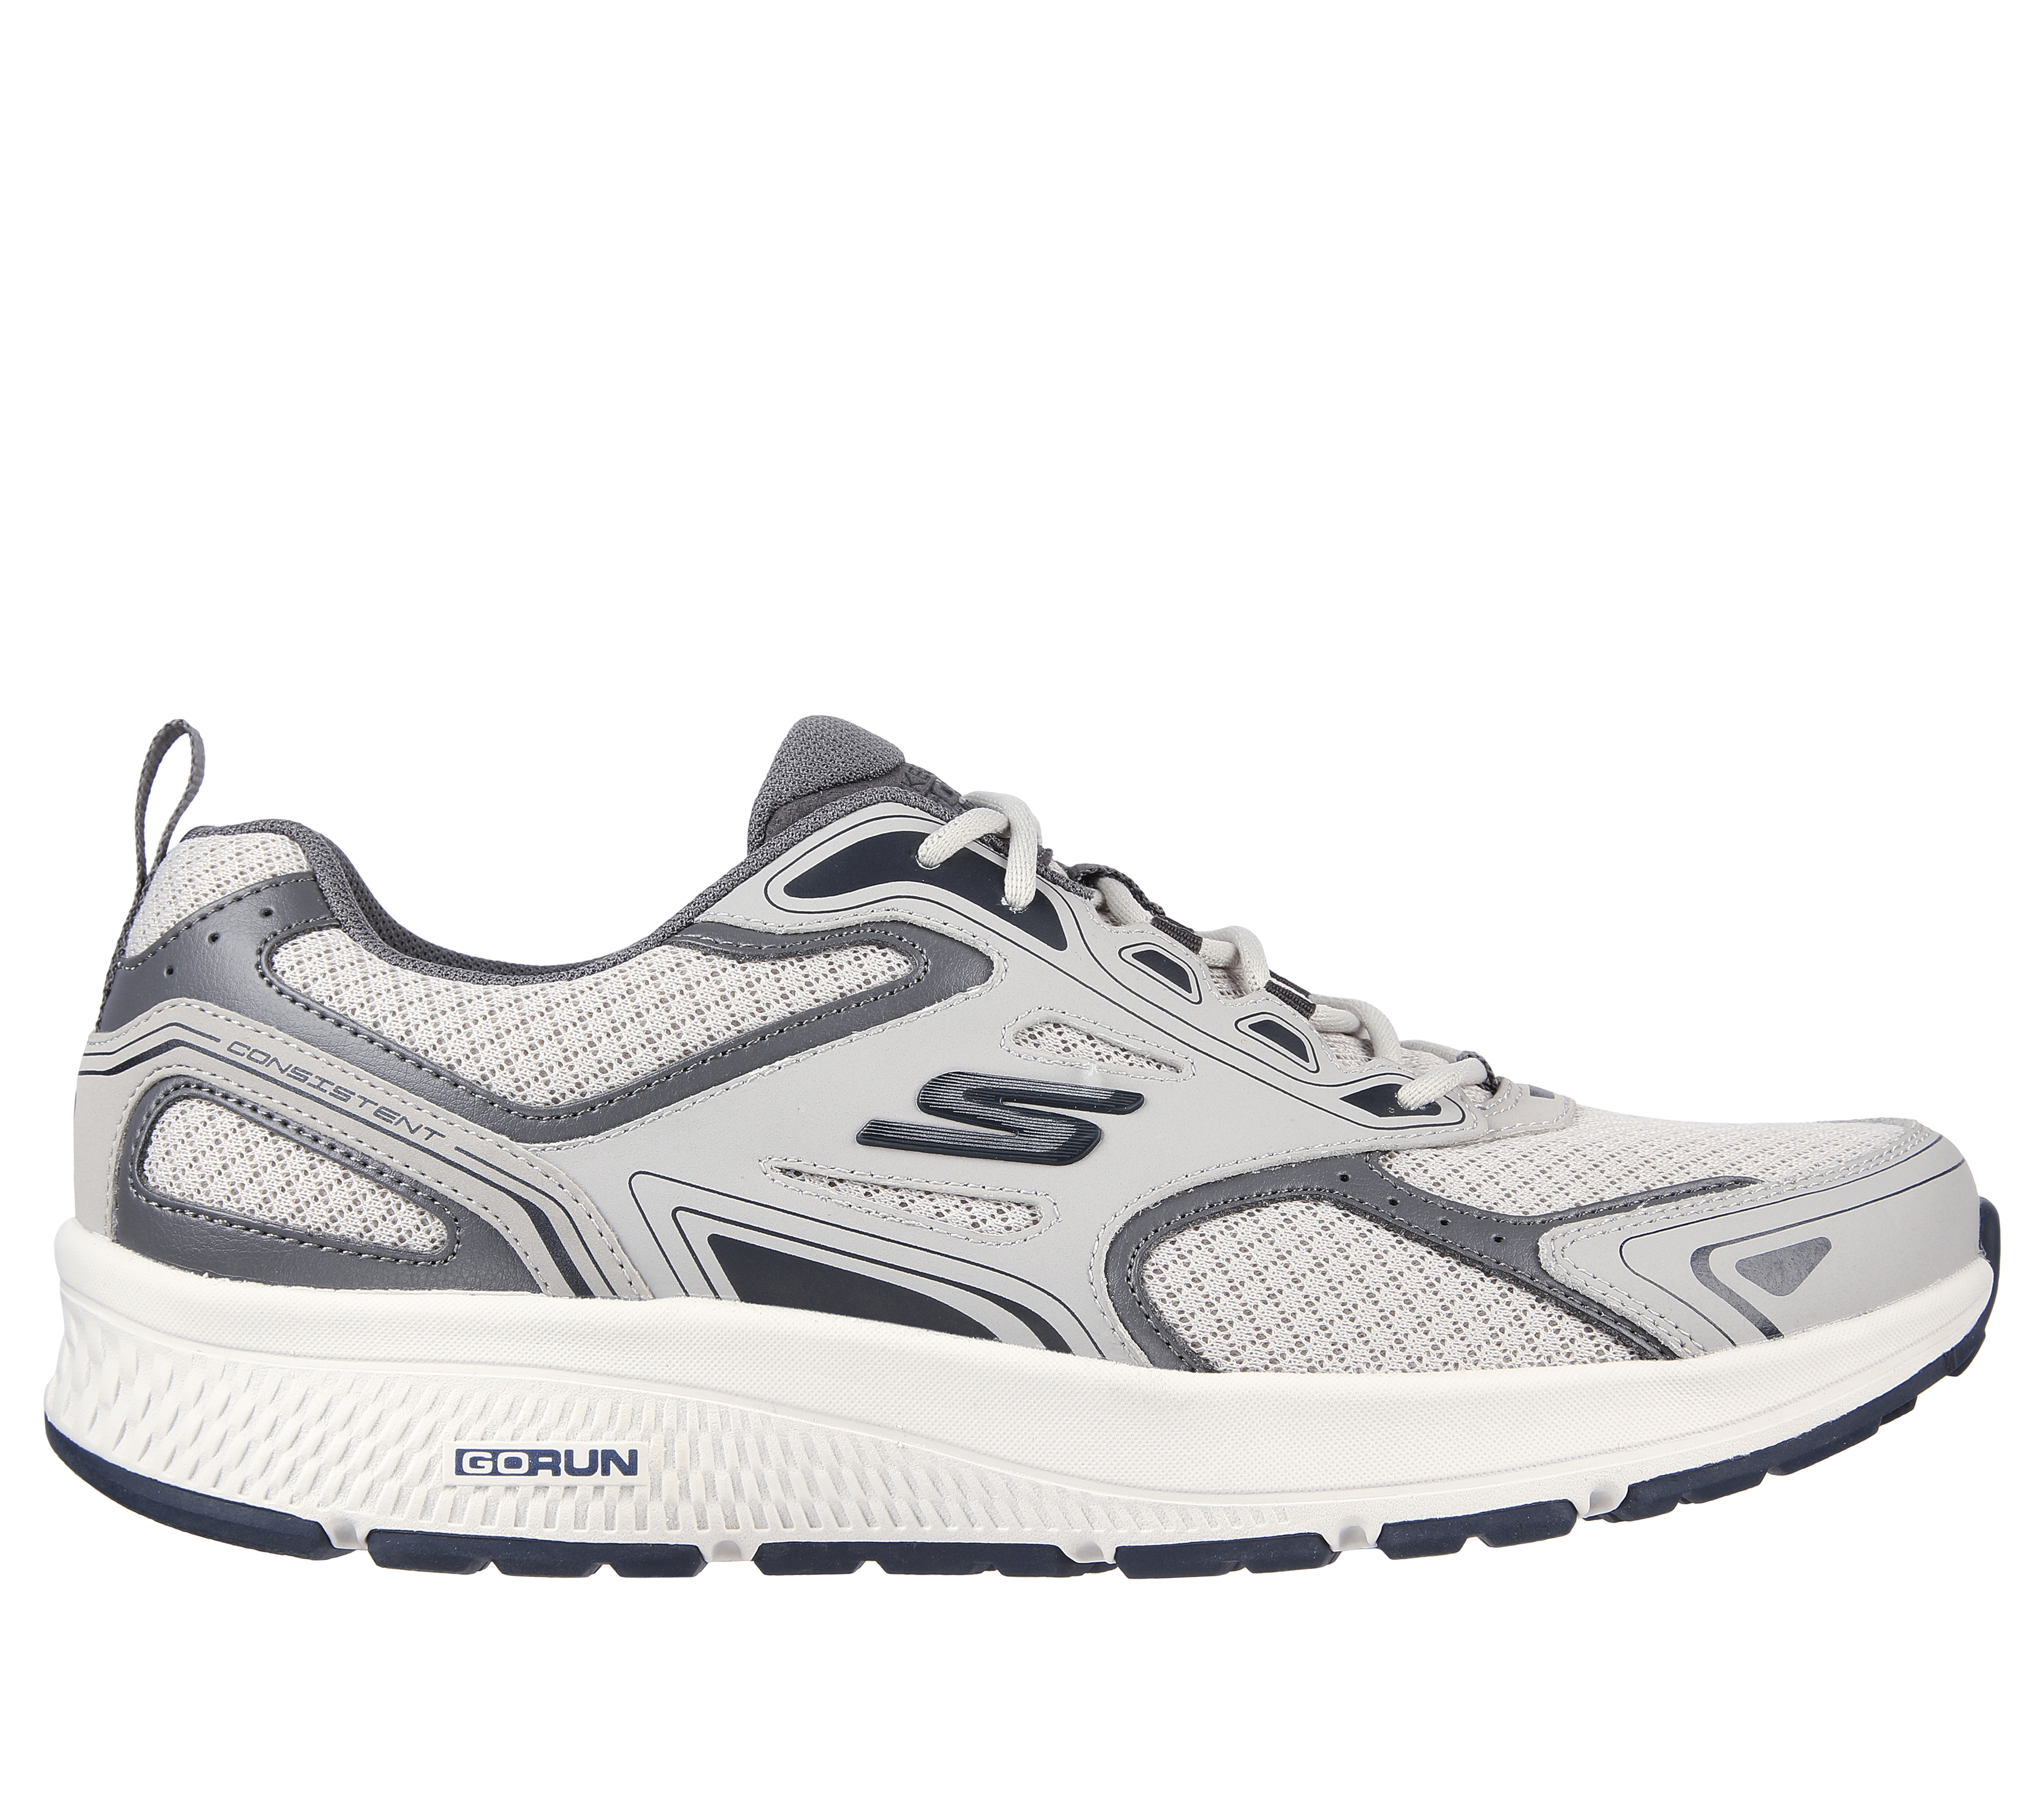 skechers consistent running shoes ladies review